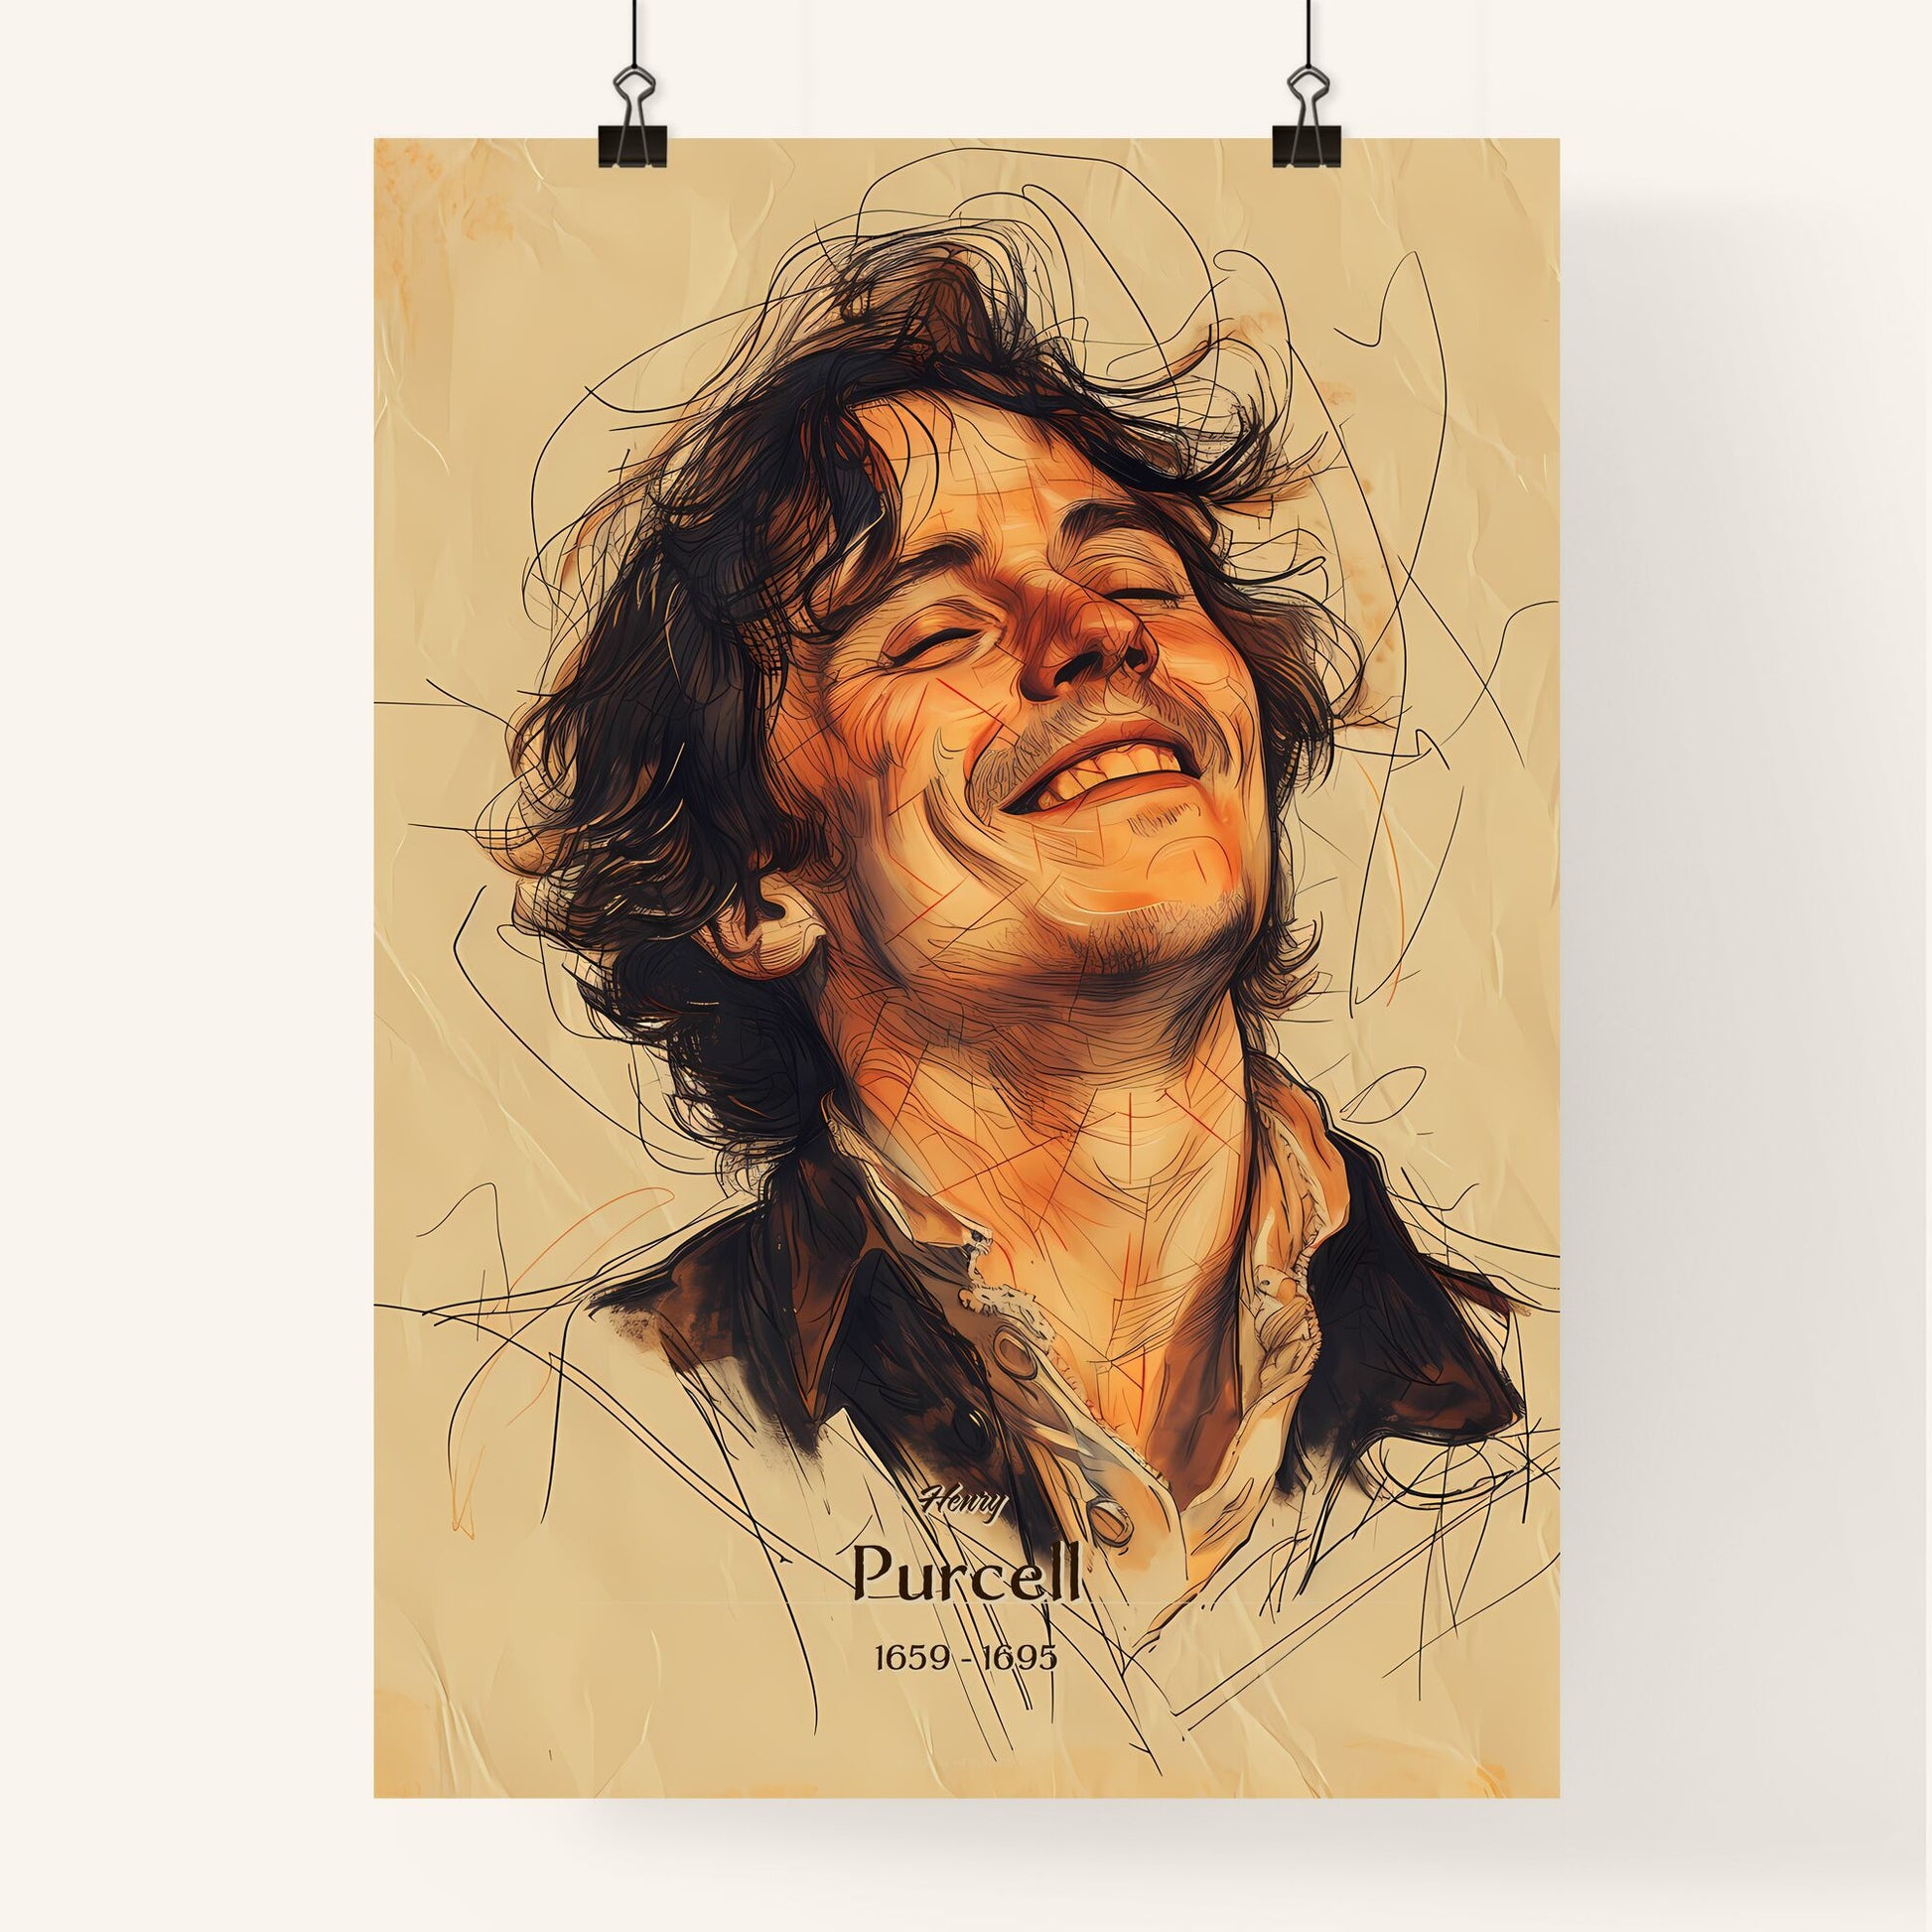 Henry, Purcell, 1659 - 1695, A Poster of a drawing of a man smiling Default Title